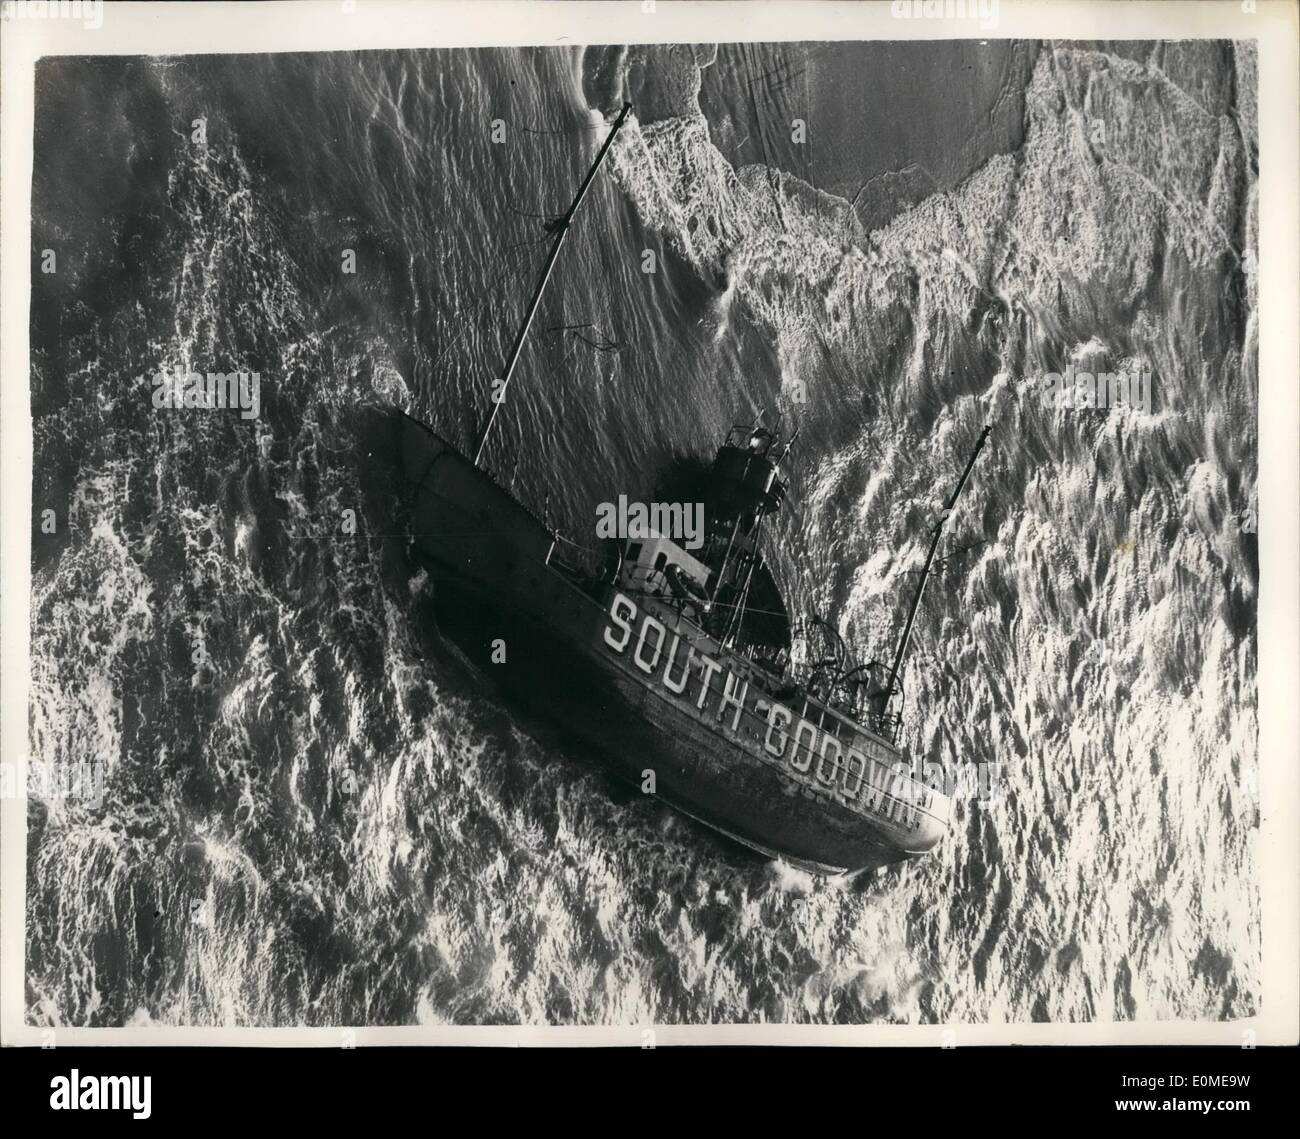 Nov. 11, 1954 - Eight trapped in wrecked Lightship. Man Stands on